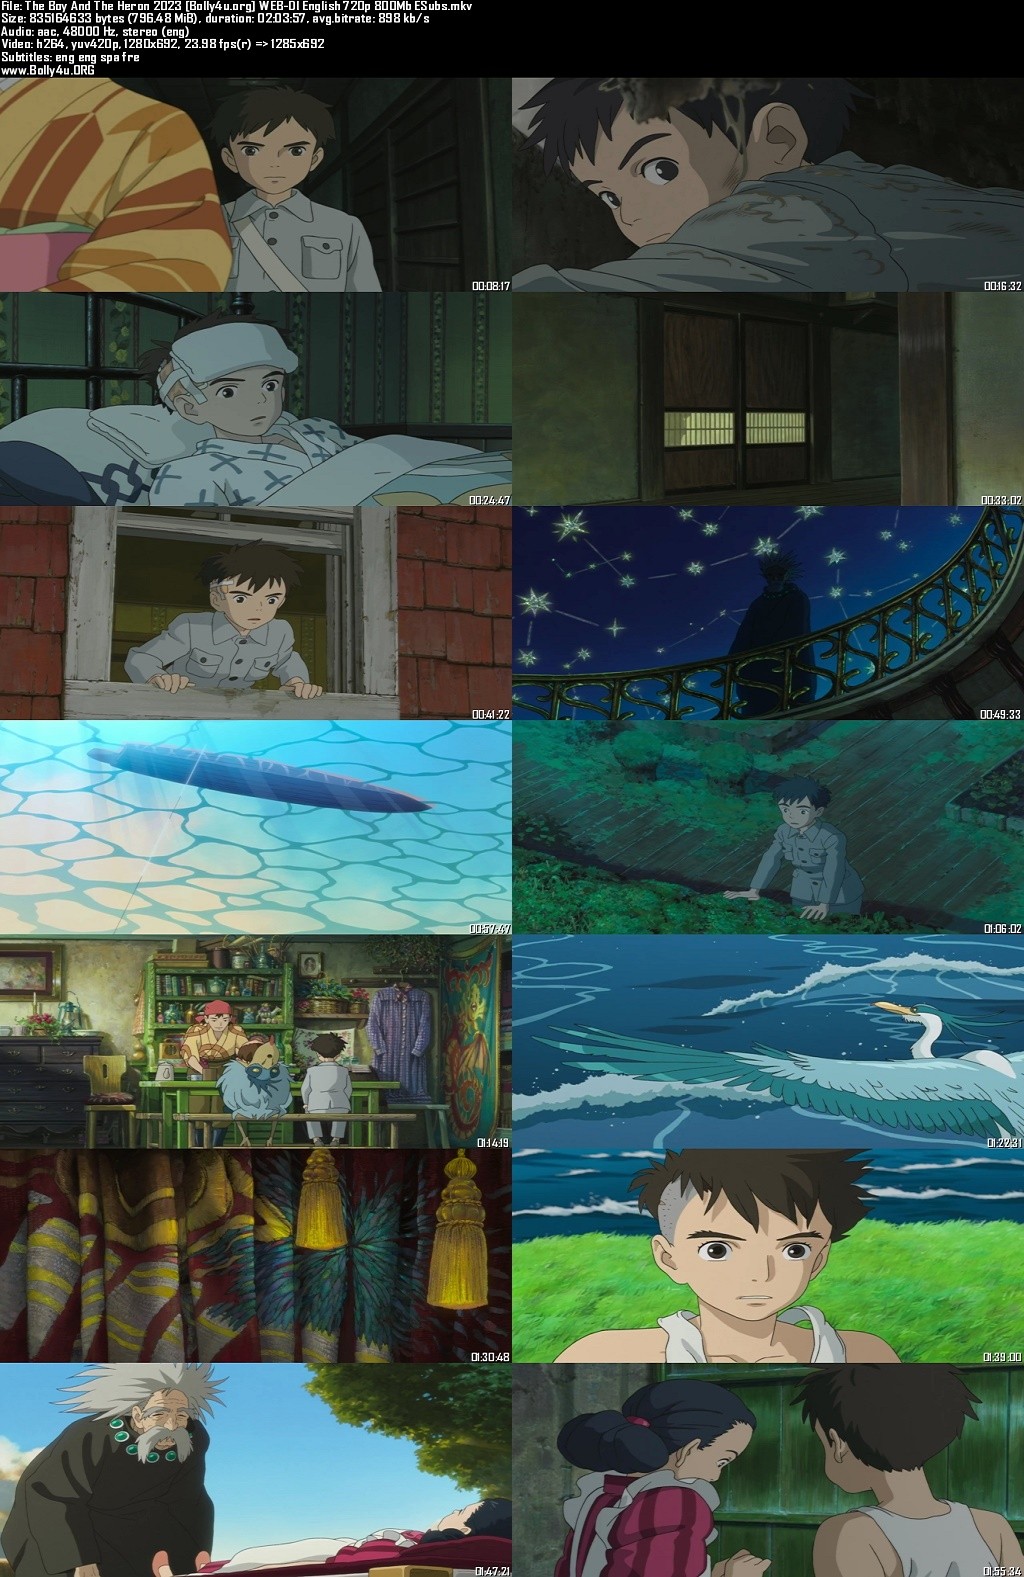 18+ The Boy And The Heron 2023 WEB-DL English Full Movie Download 720p 480p